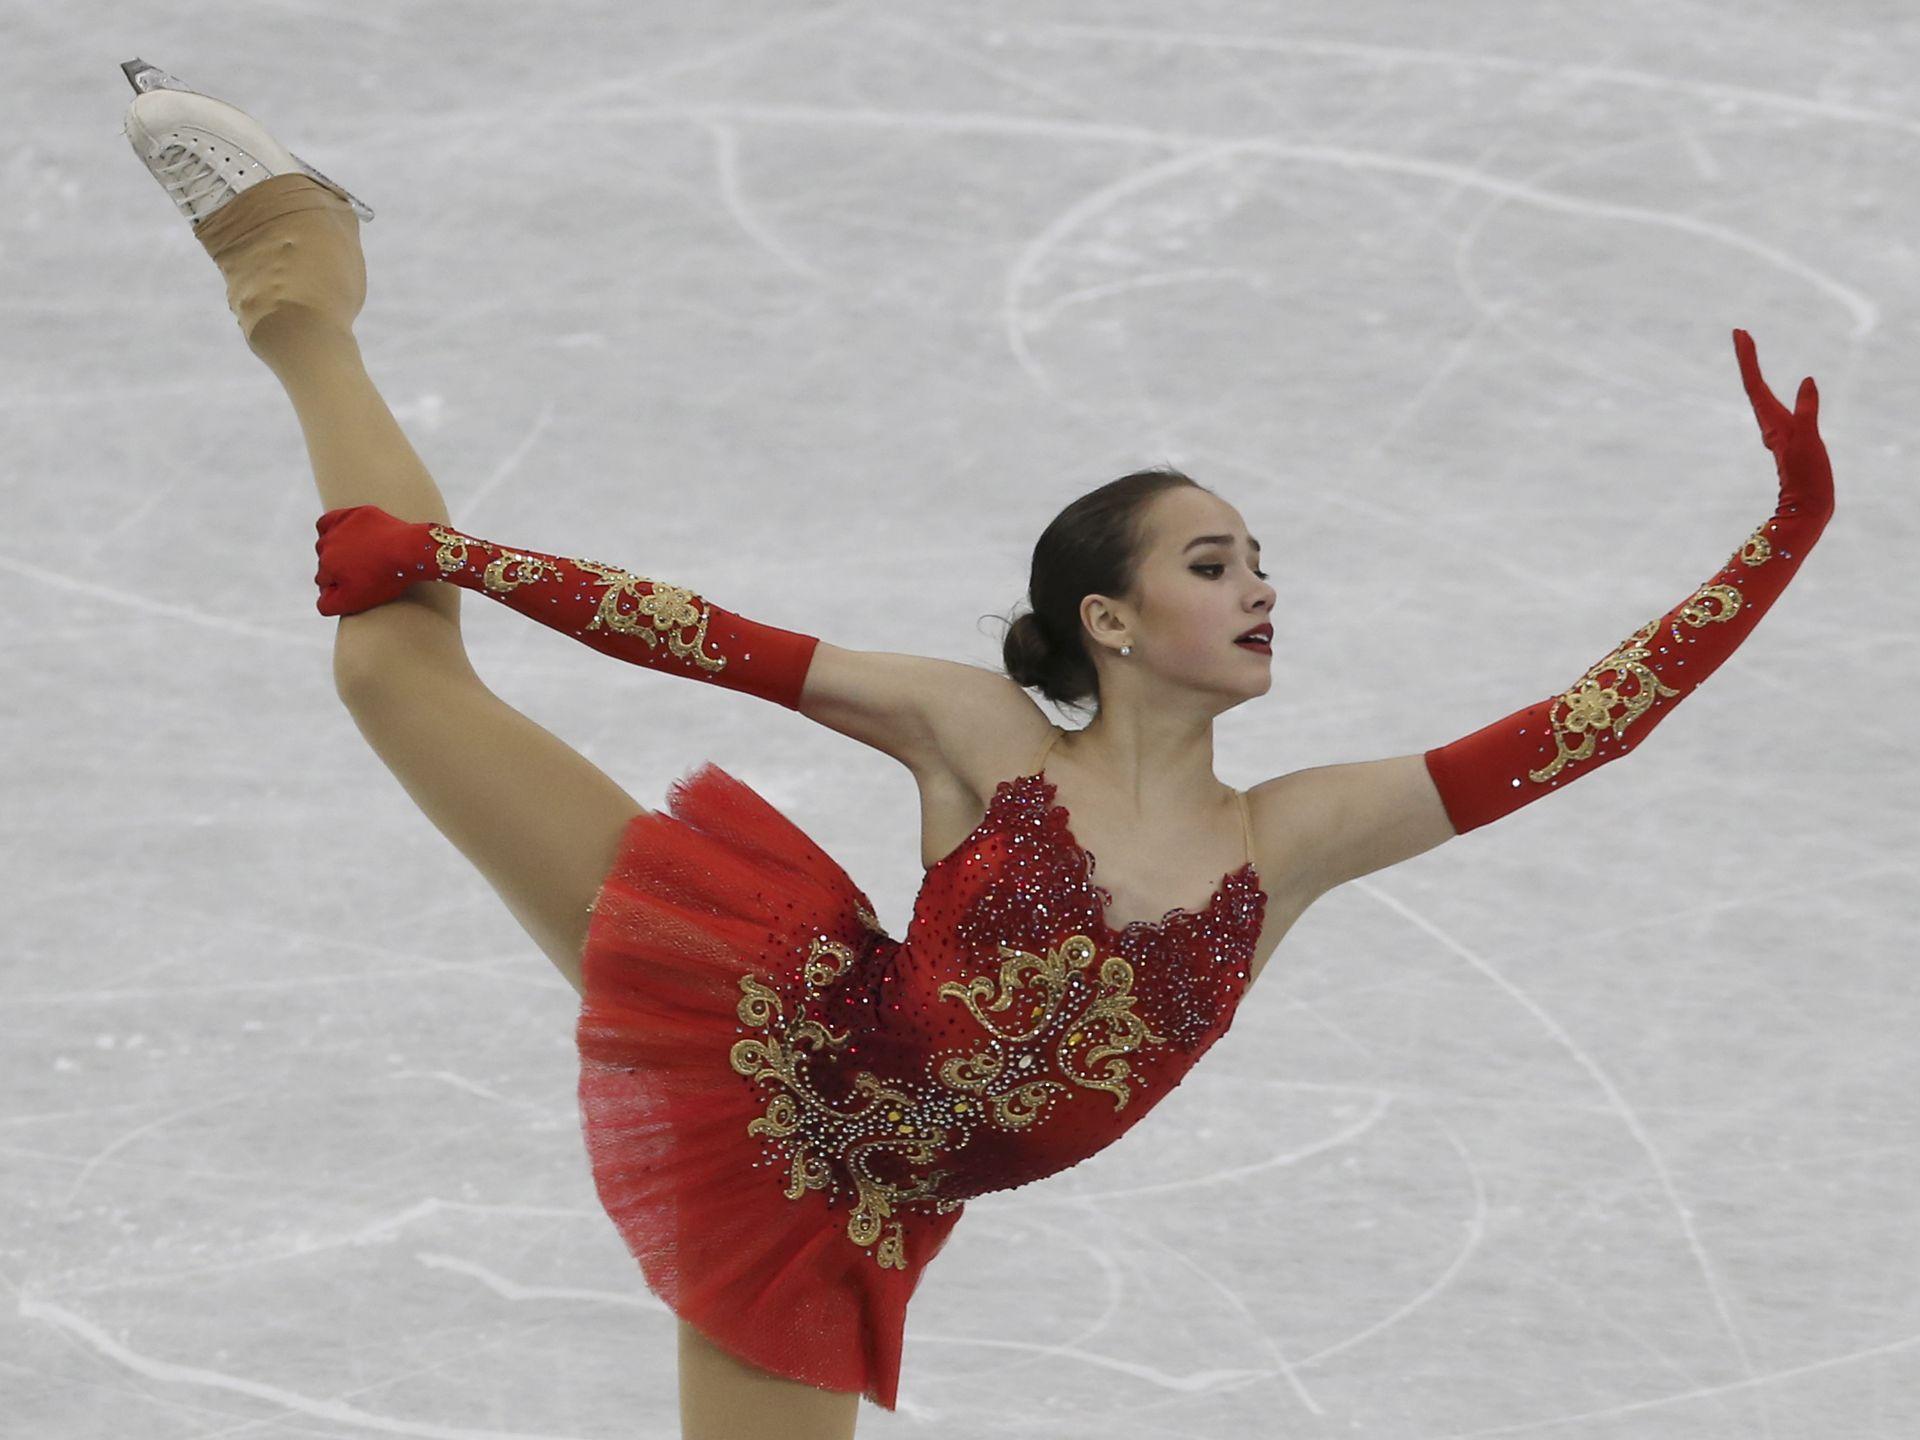 World's top figure skaters compete at Grand Prix Final